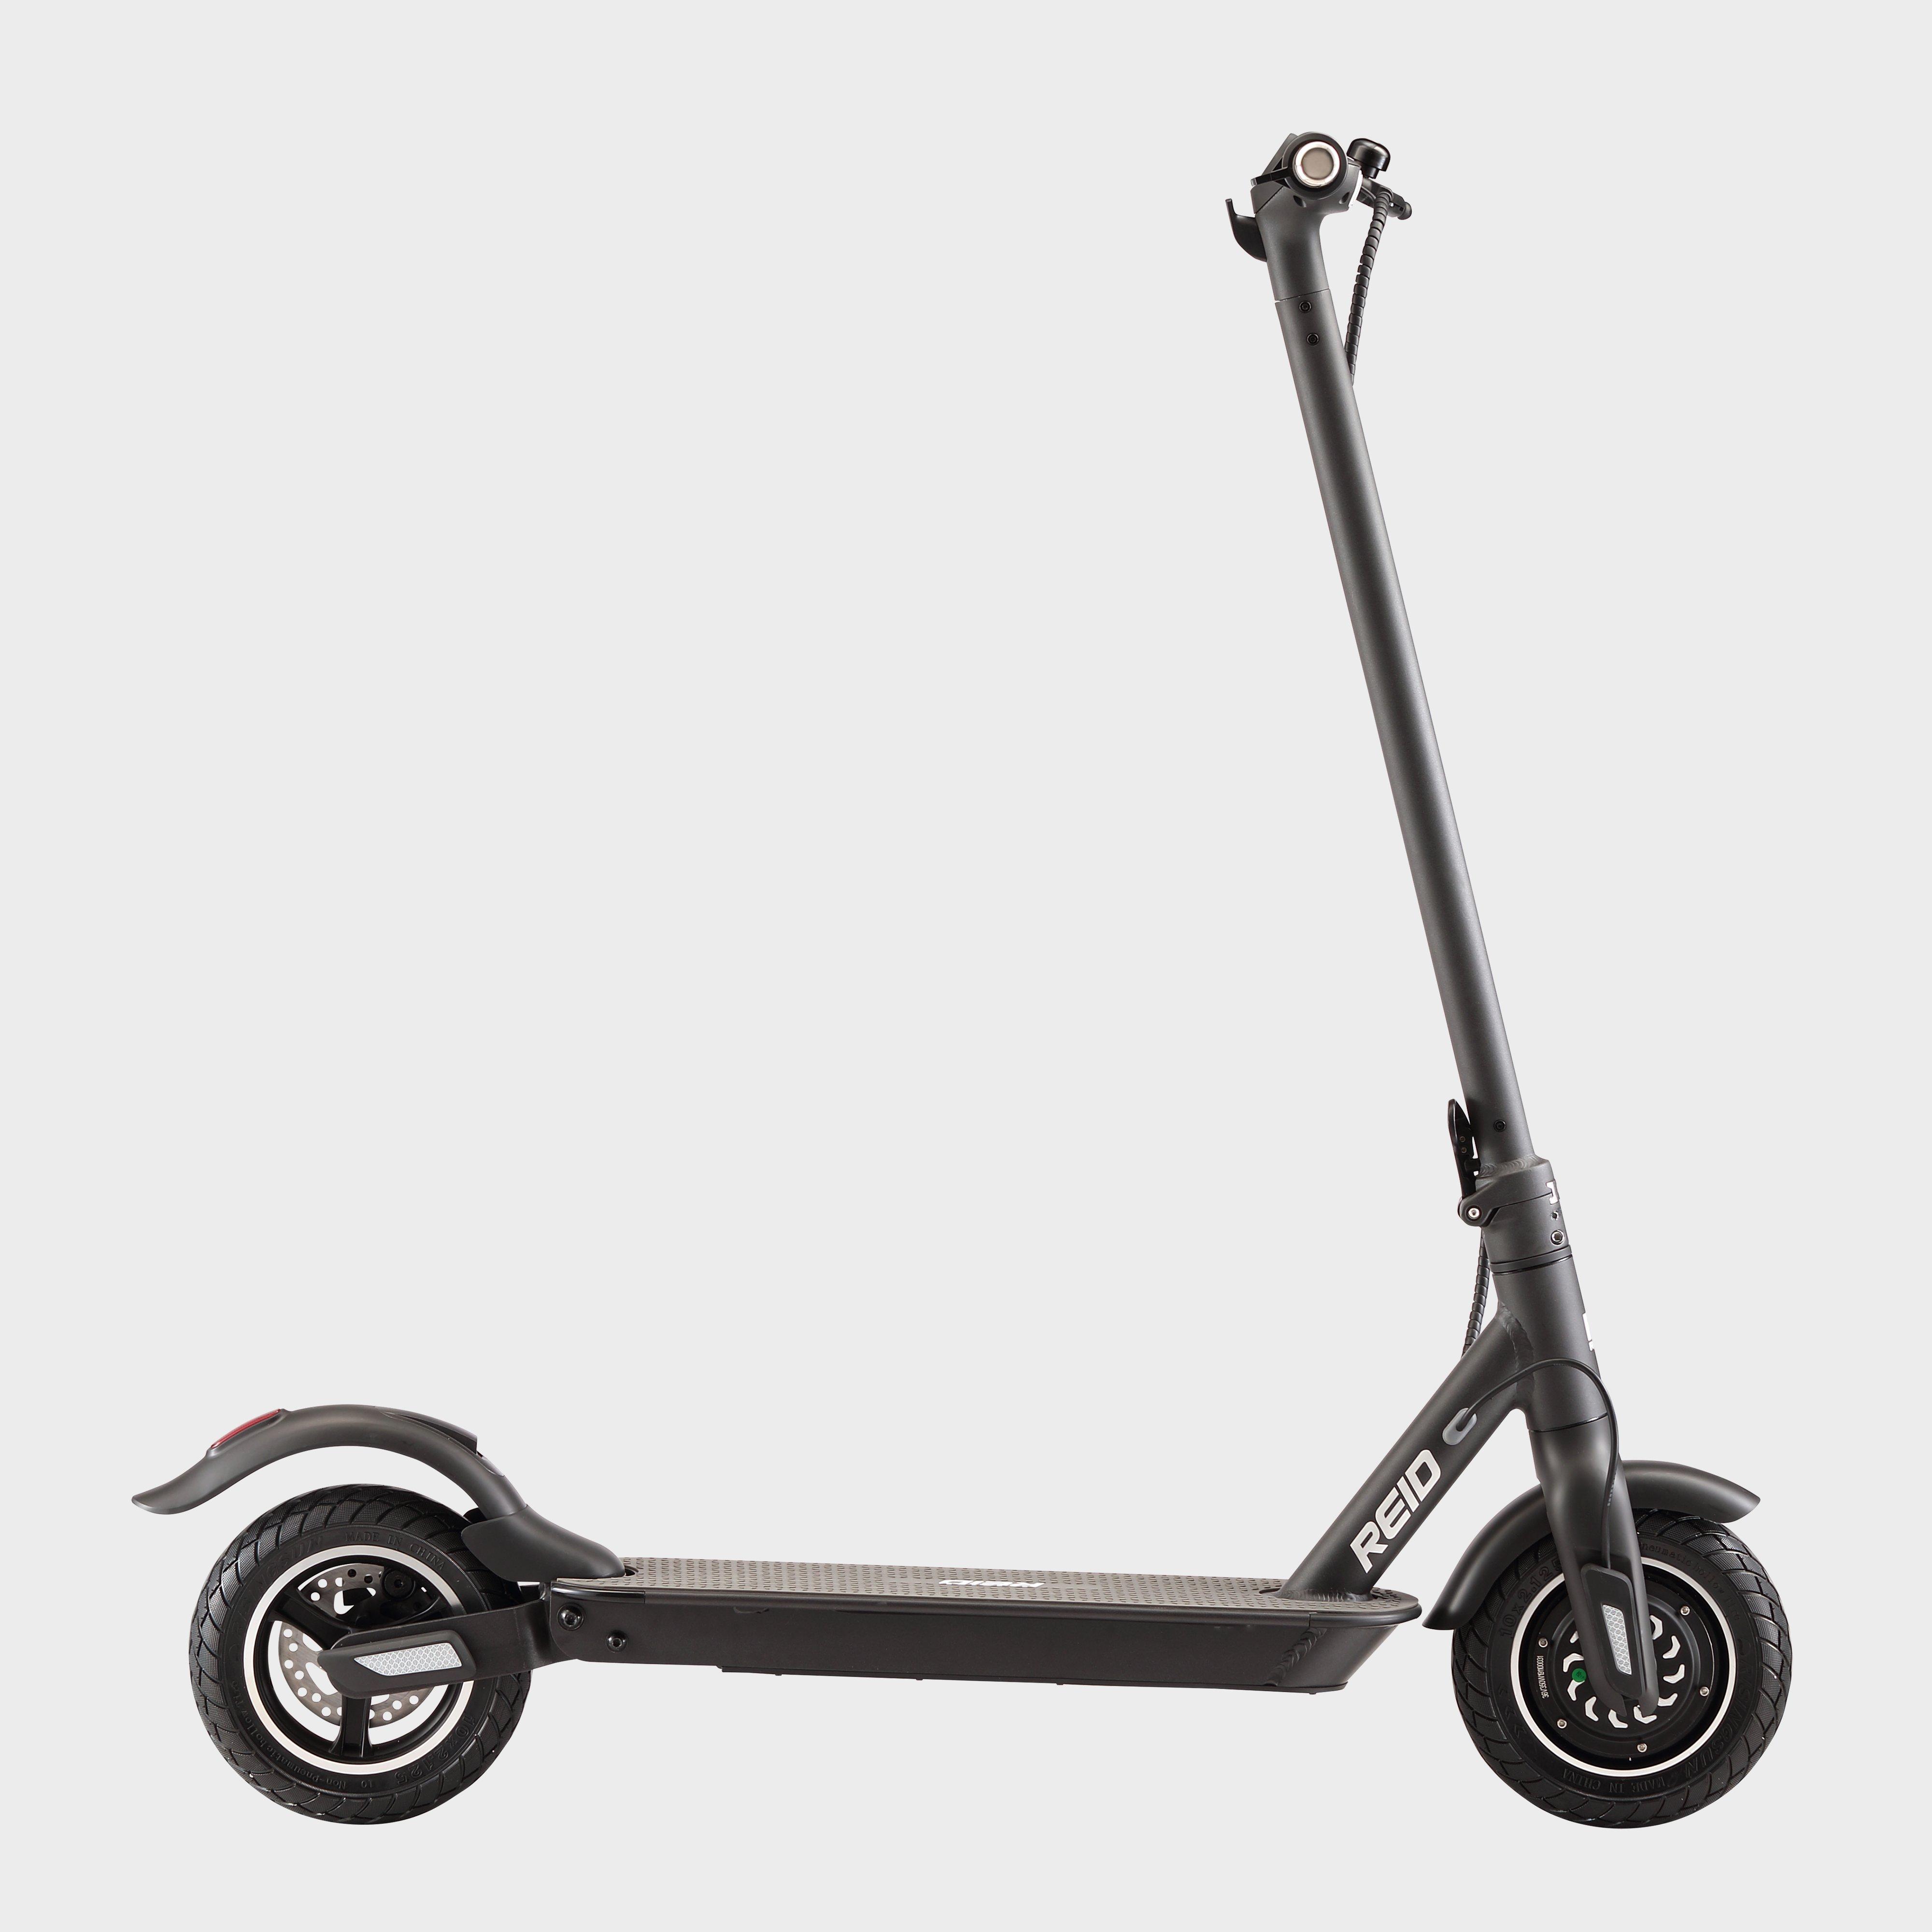 Reid E4 Electric Scooter Review